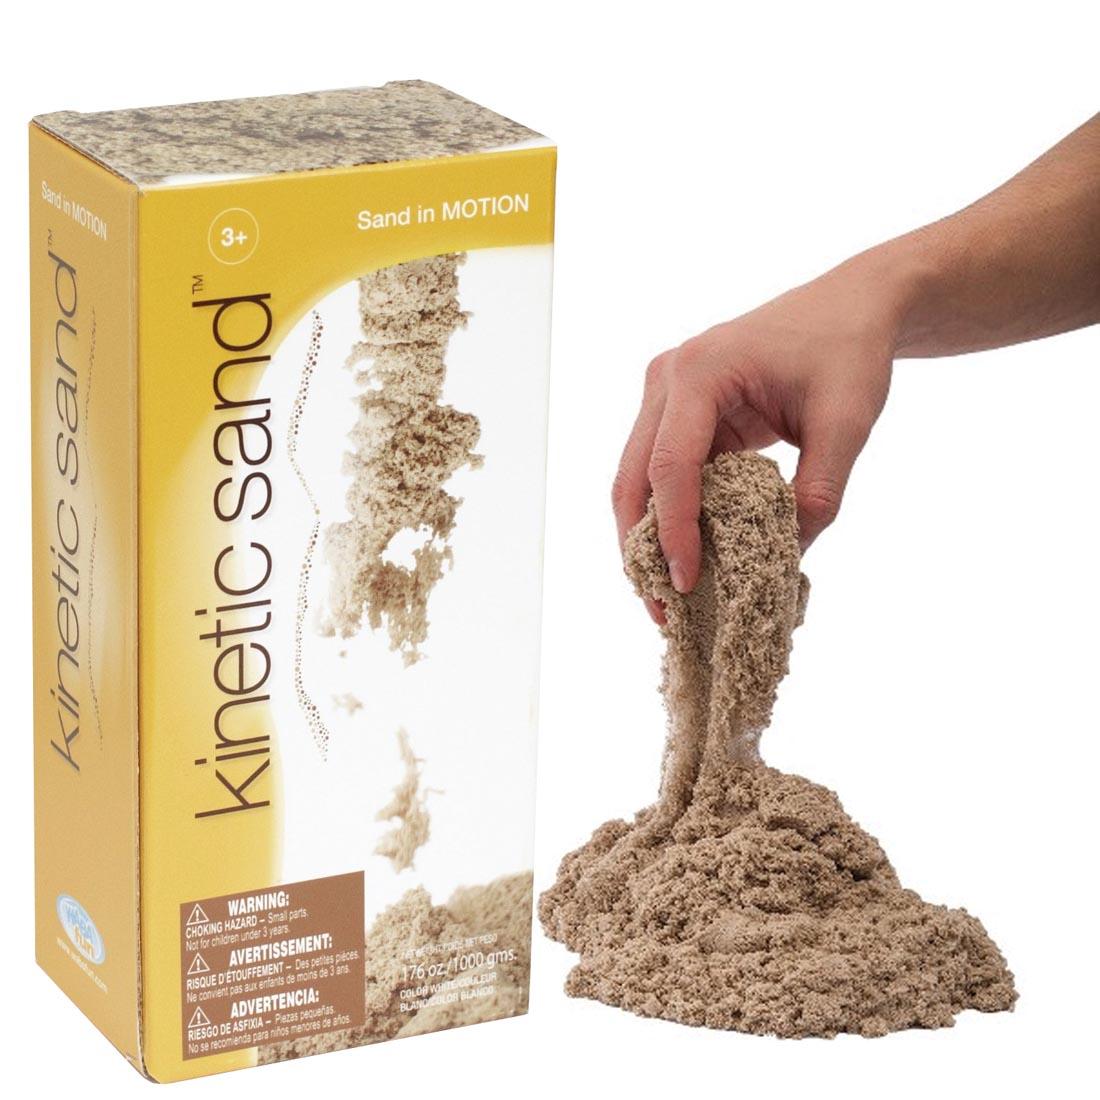 2.2 lb. package of Kinetic Sand, and hand playing with sand on the side